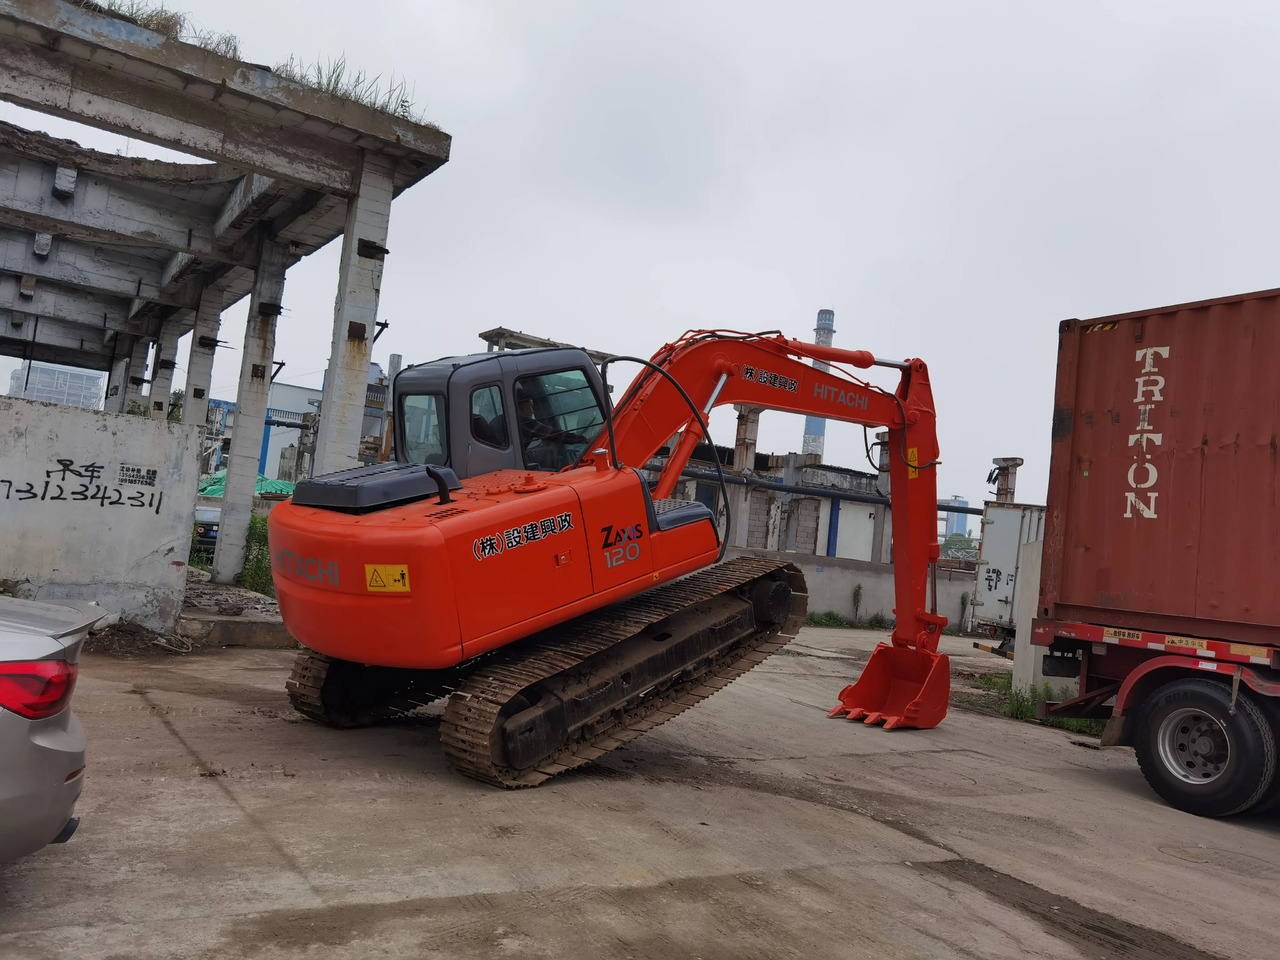 Crawler excavator cheap used hitachi ZX120 excavator used excavators japan used excavator machine in stock now: picture 6